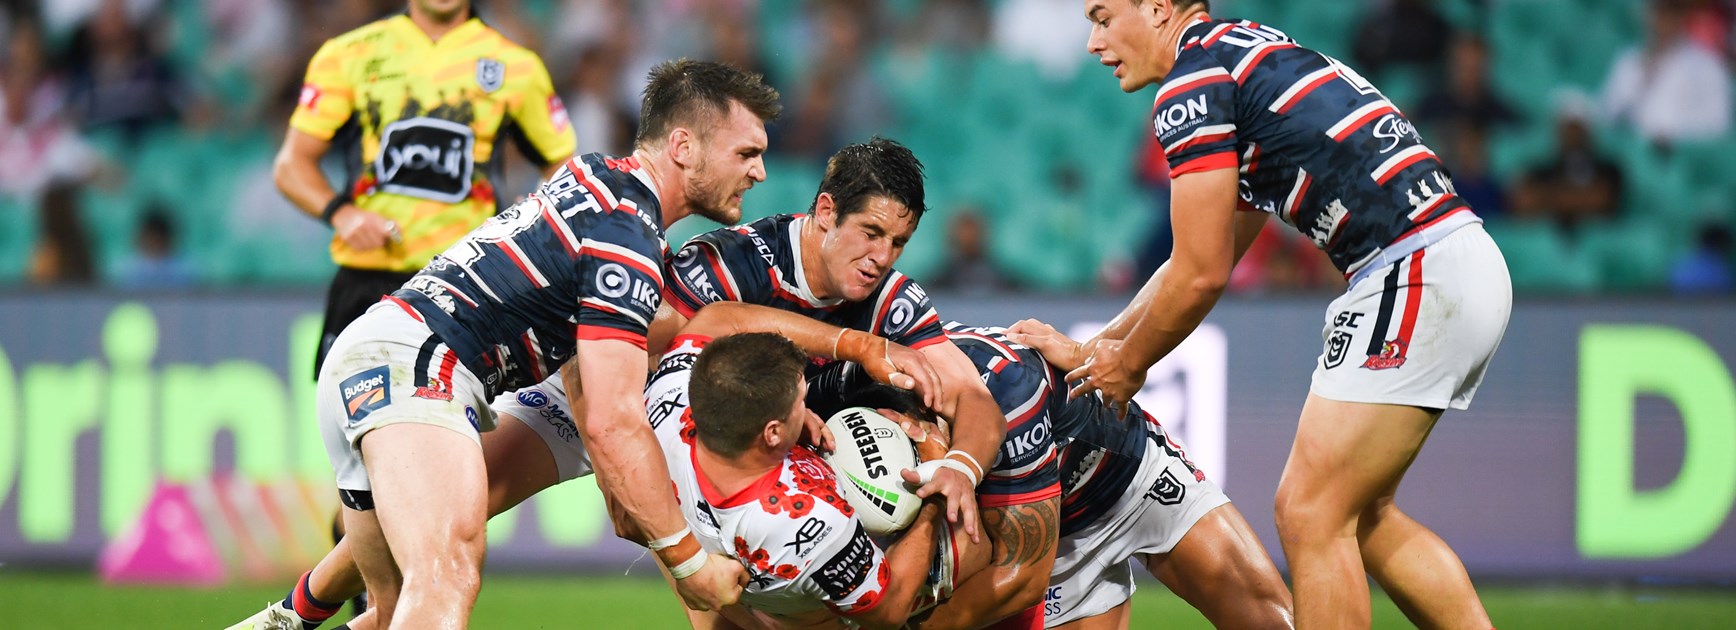 The Roosters muscle up against the Dragons.